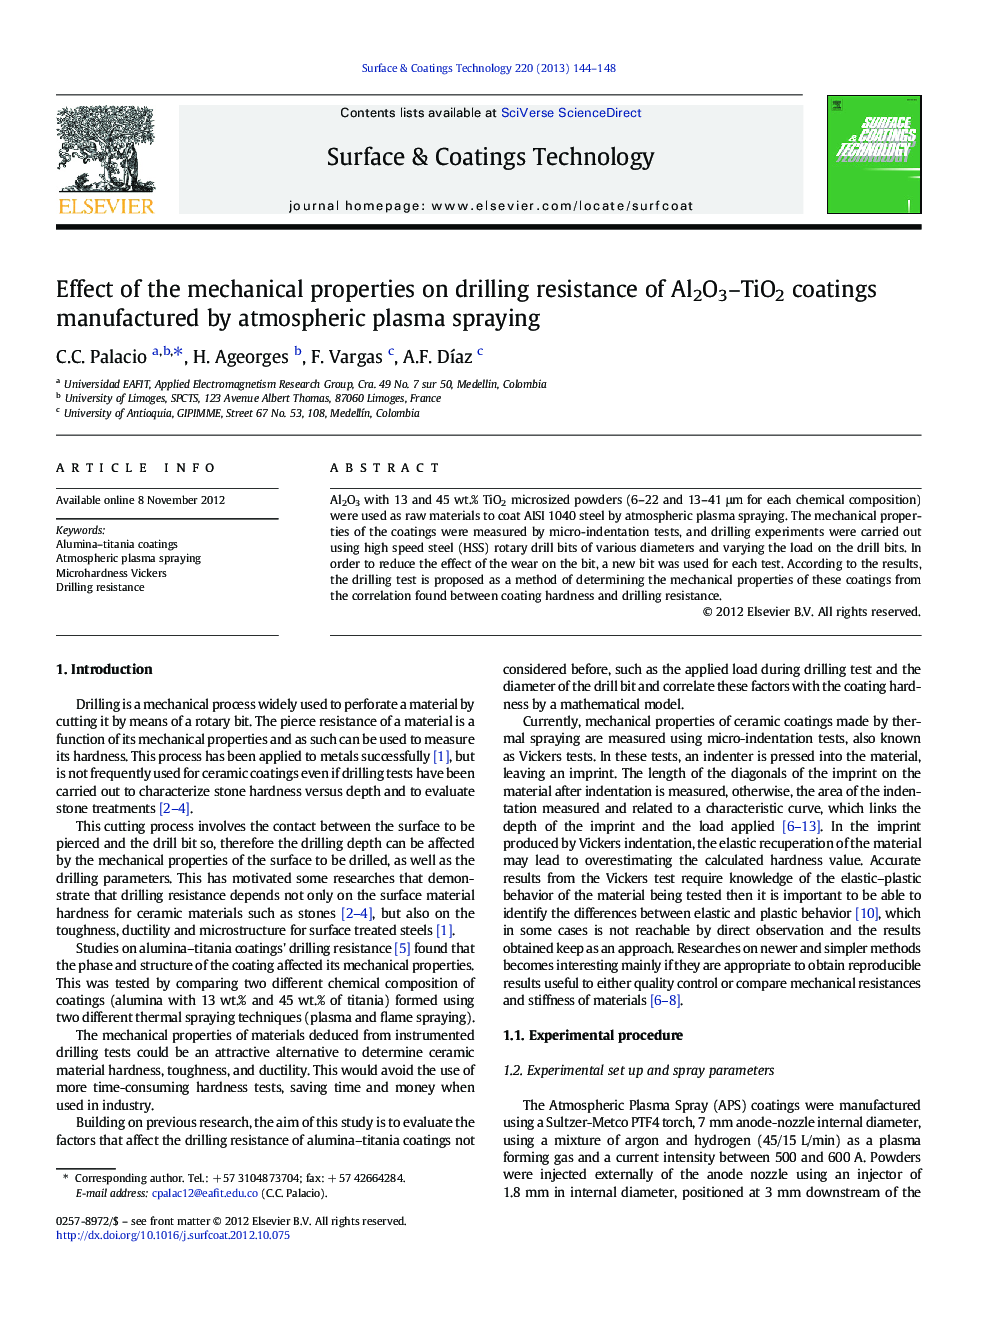 Effect of the mechanical properties on drilling resistance of Al2O3–TiO2 coatings manufactured by atmospheric plasma spraying